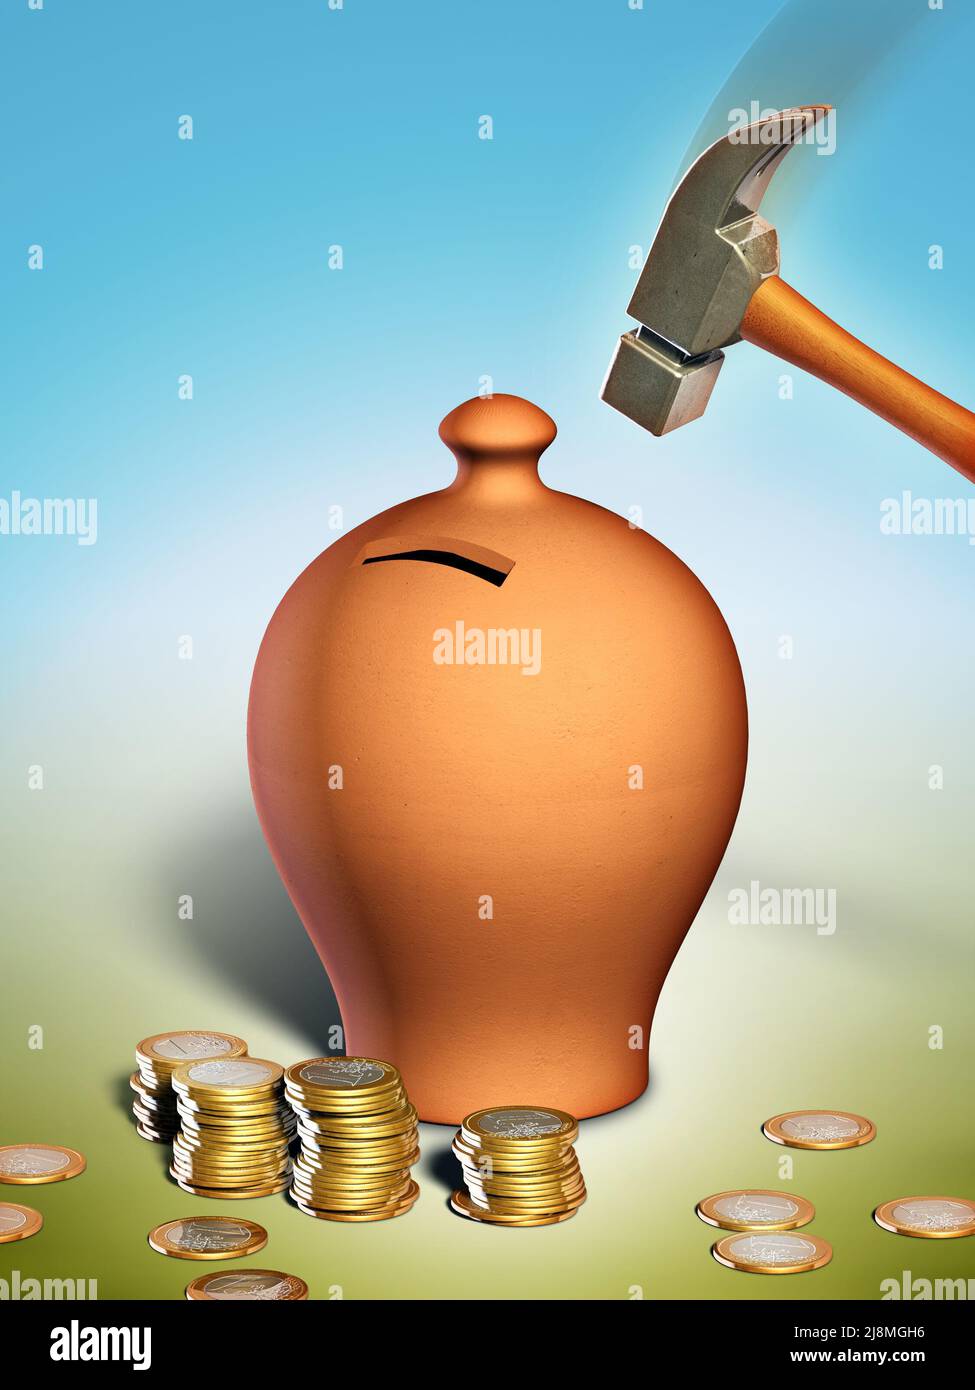 Hammer hitting a terracotta money box. Digital illustration, clipping path included. Stock Photo